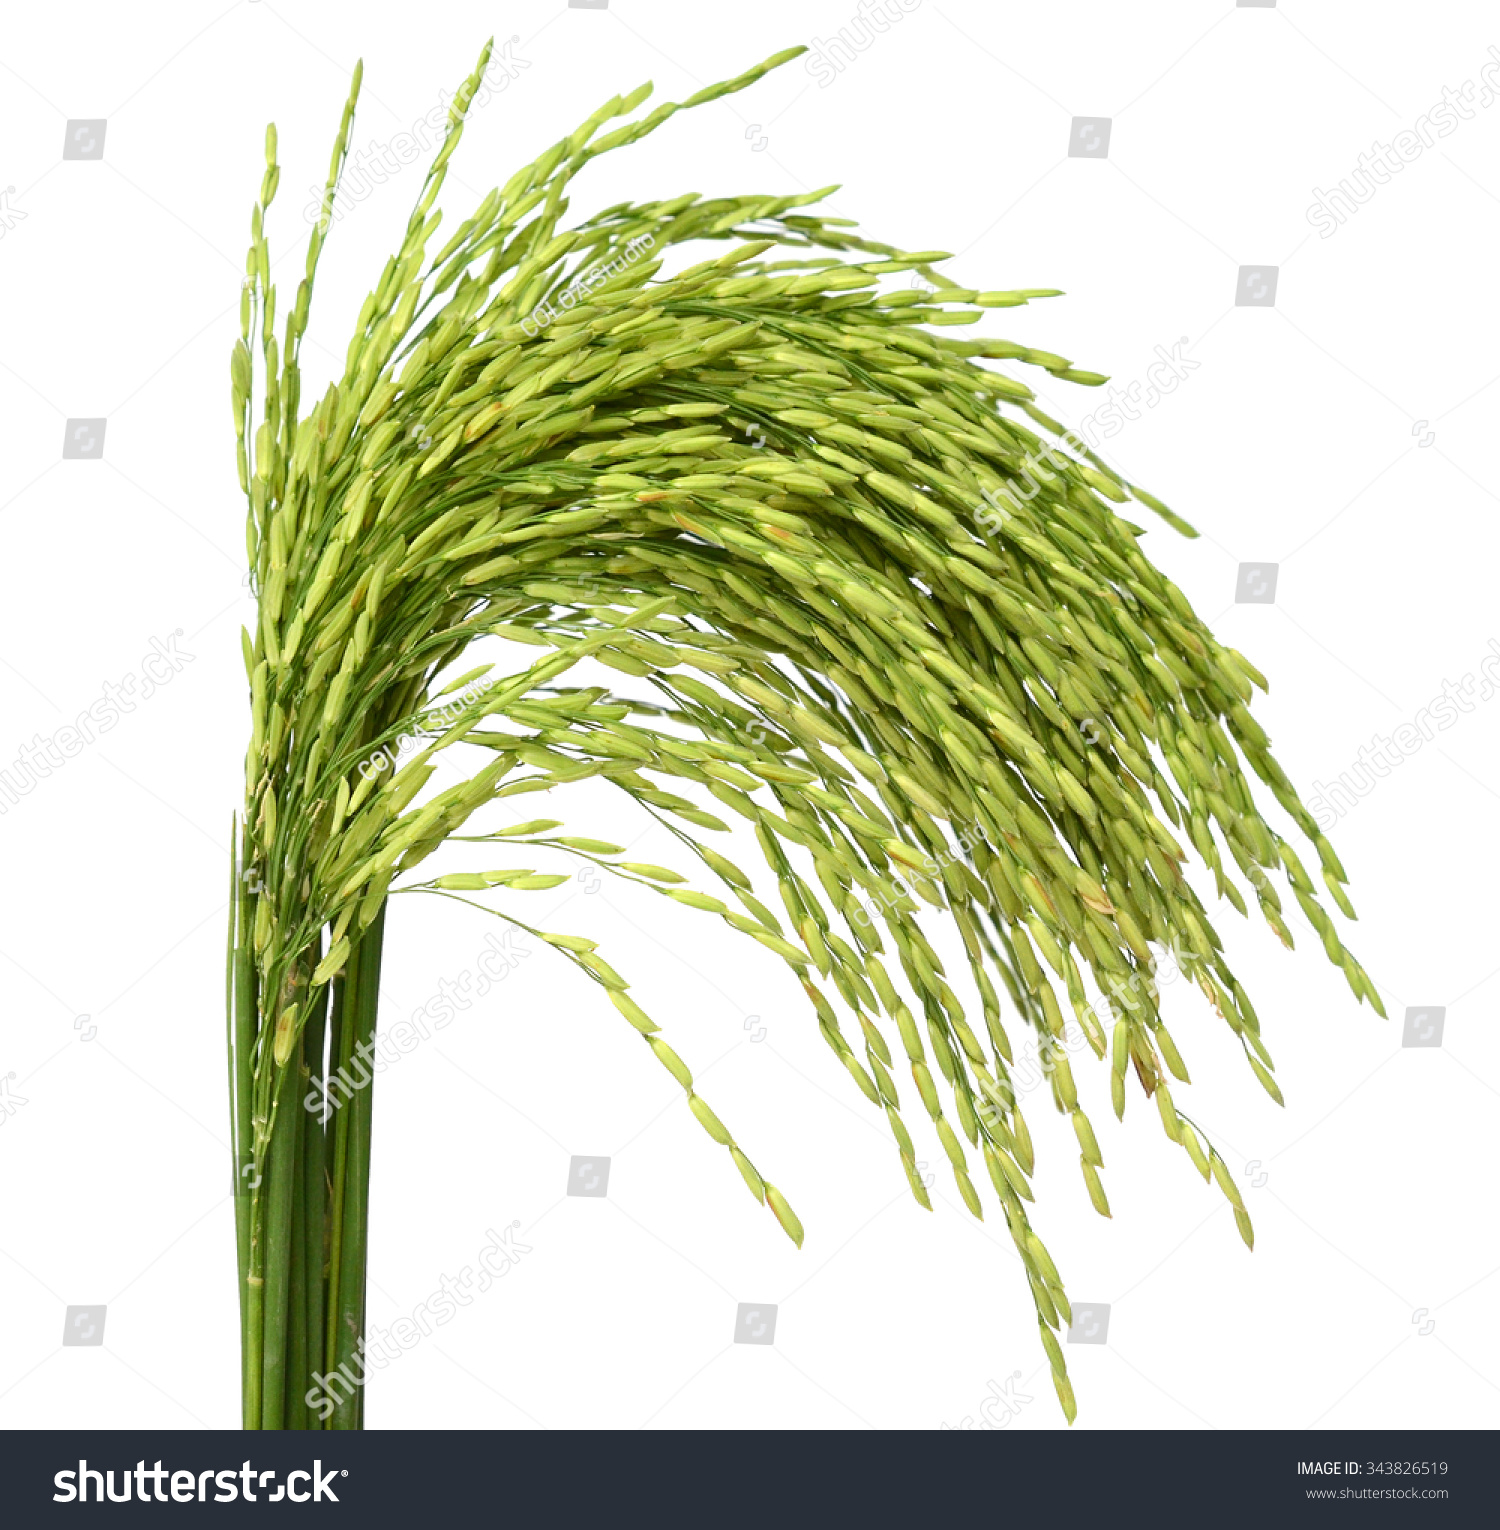 stock-photo-ear-of-rice-isolated-on-white-background-343826519.jpg